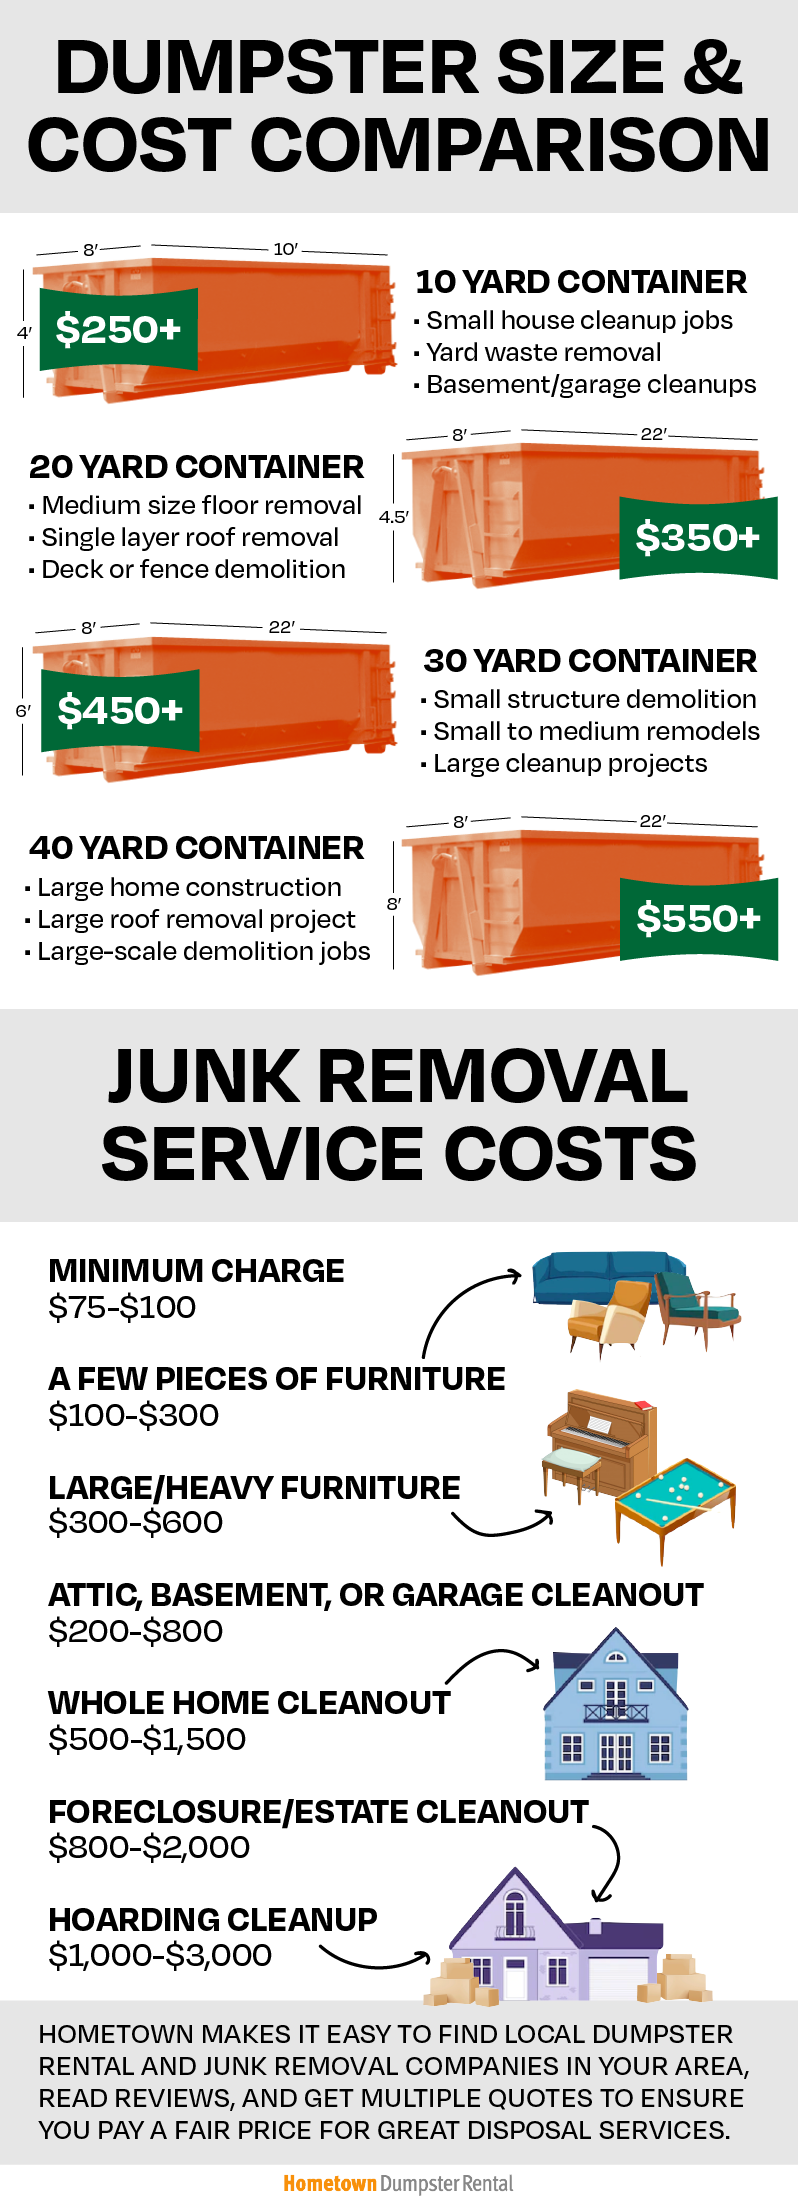 dumpster rental and junk removal costs infographic